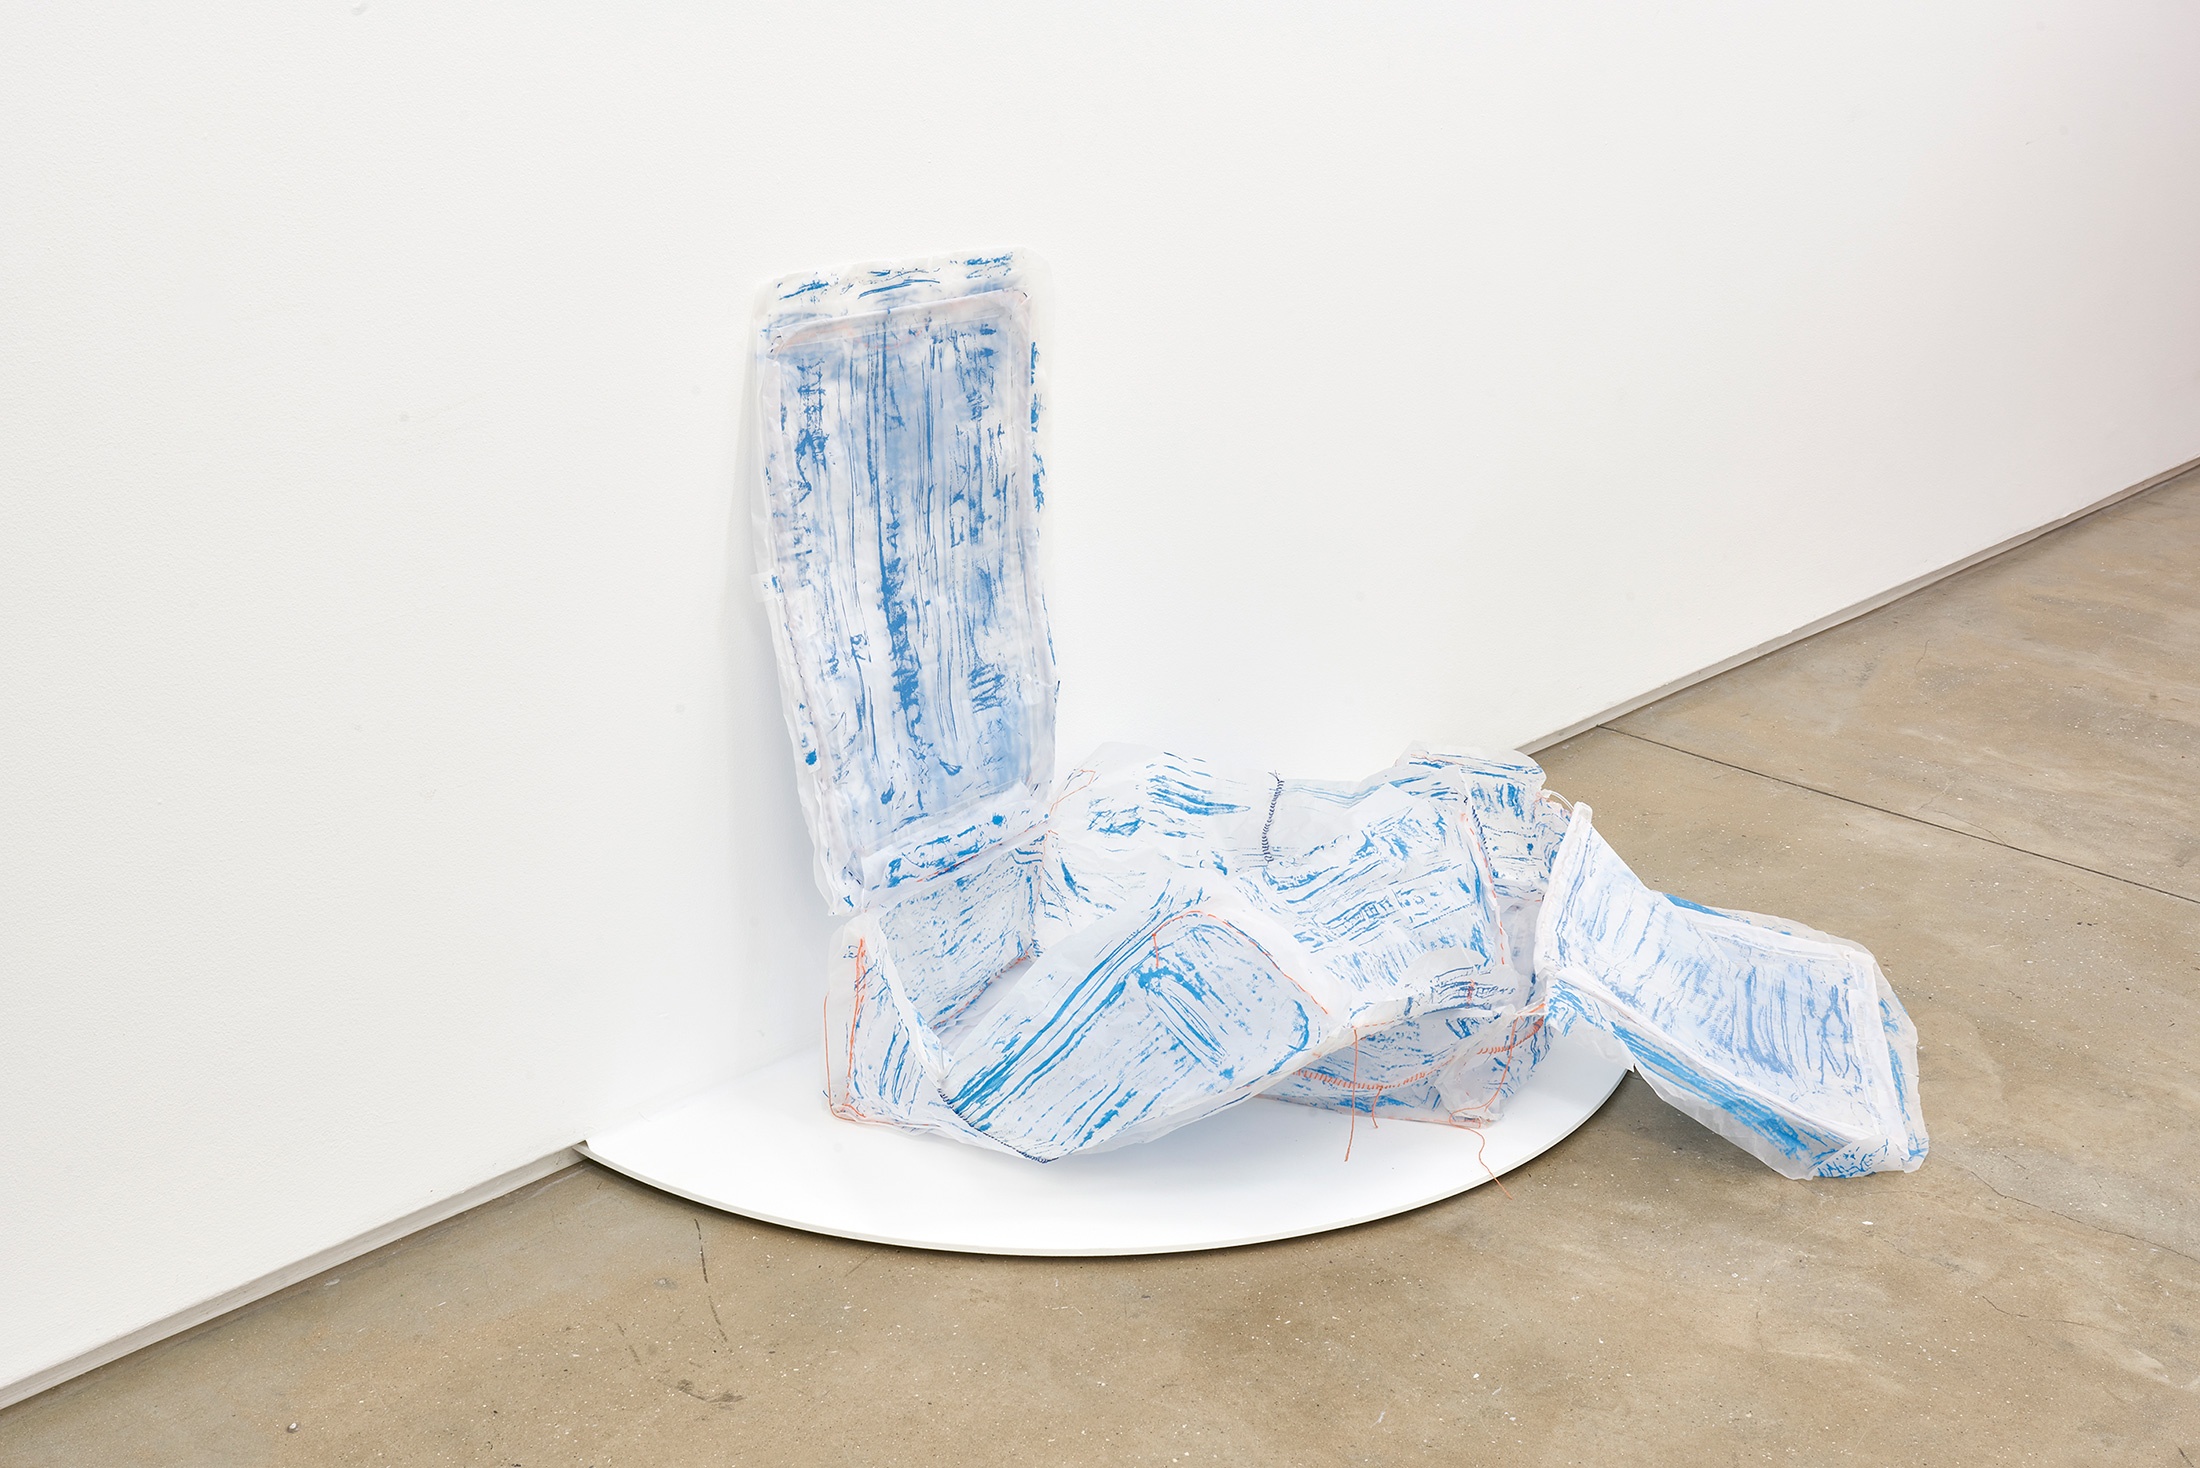 Installation photograph that shows Thato Makatu’s butcher-paper sculptural work ‘home is…' resting on a semi-circular white platform attached to the base of a white wall.
